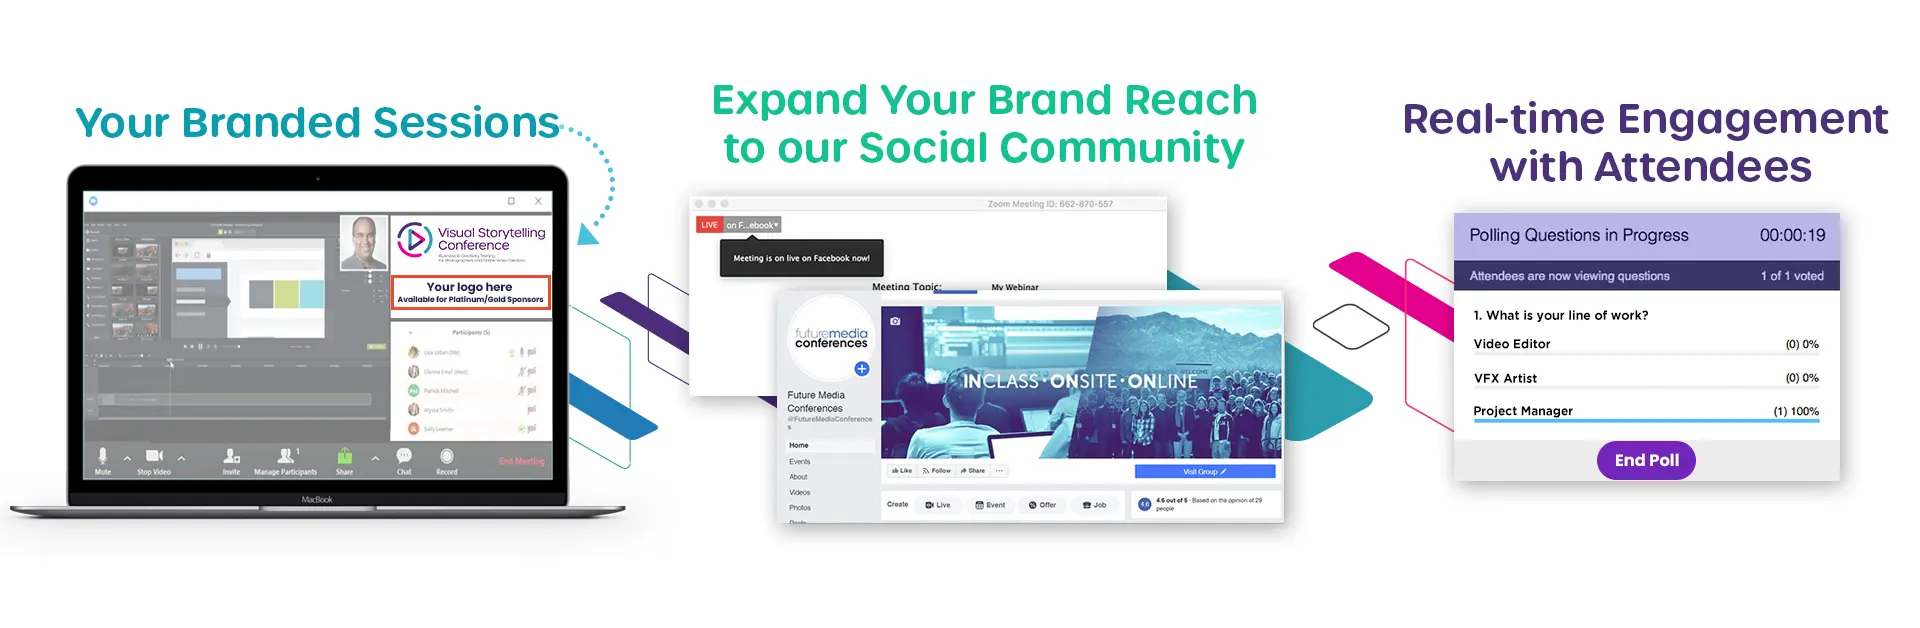 Branded Sessions opportunities. Expand Your Brand Reach to our Social Community. Real-time Engagement with Attendees.